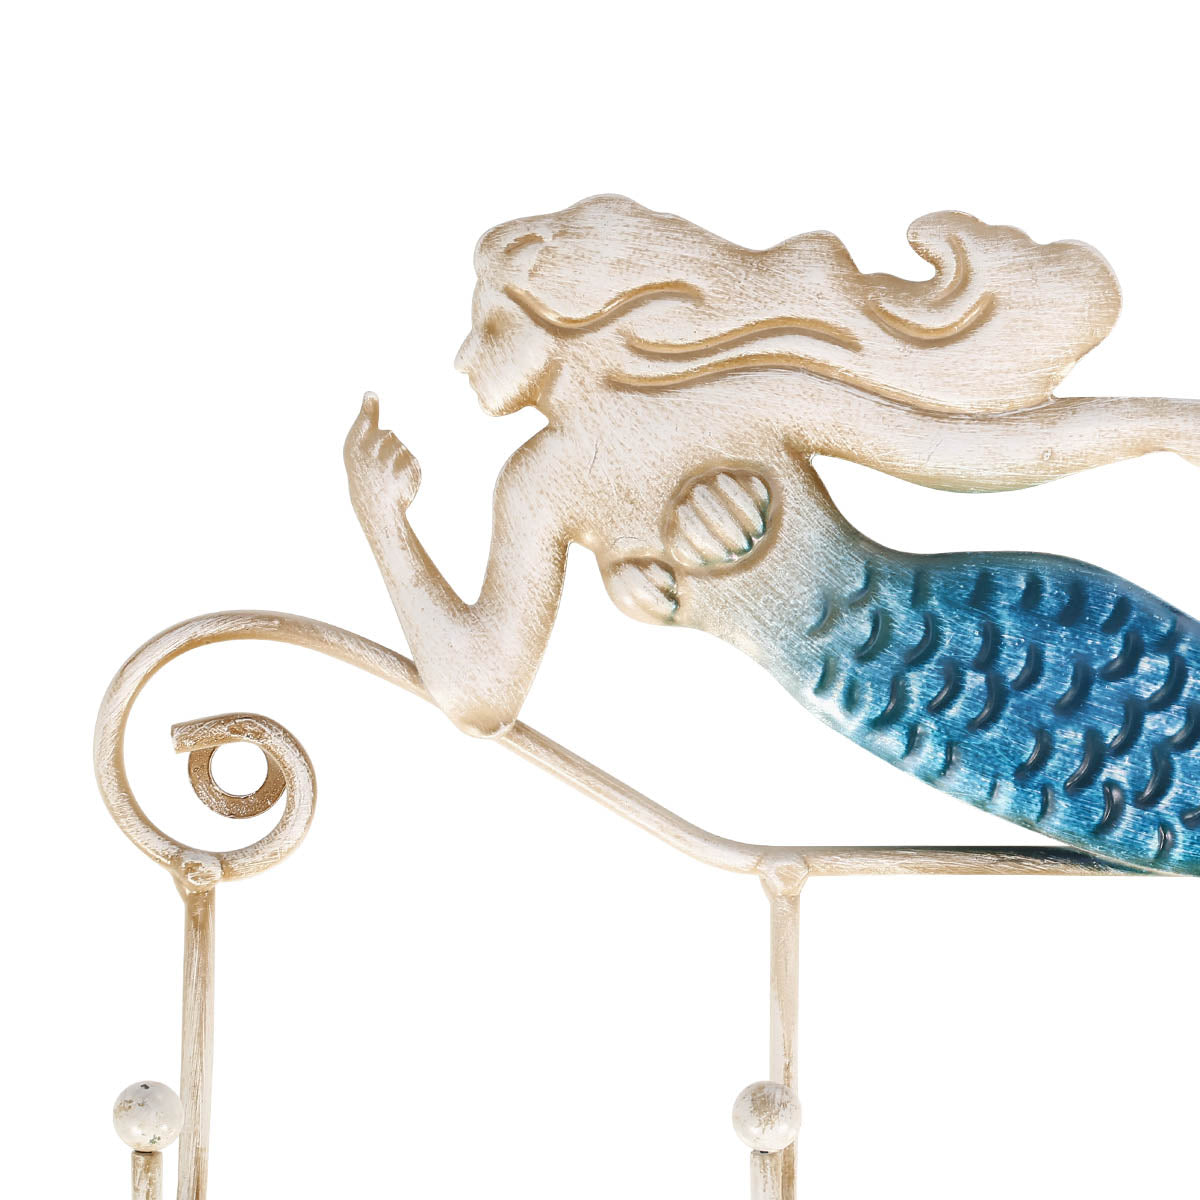 A Mermaid Retro Living Room Wall Hook with keys hanging on a hook from Maramalive™.